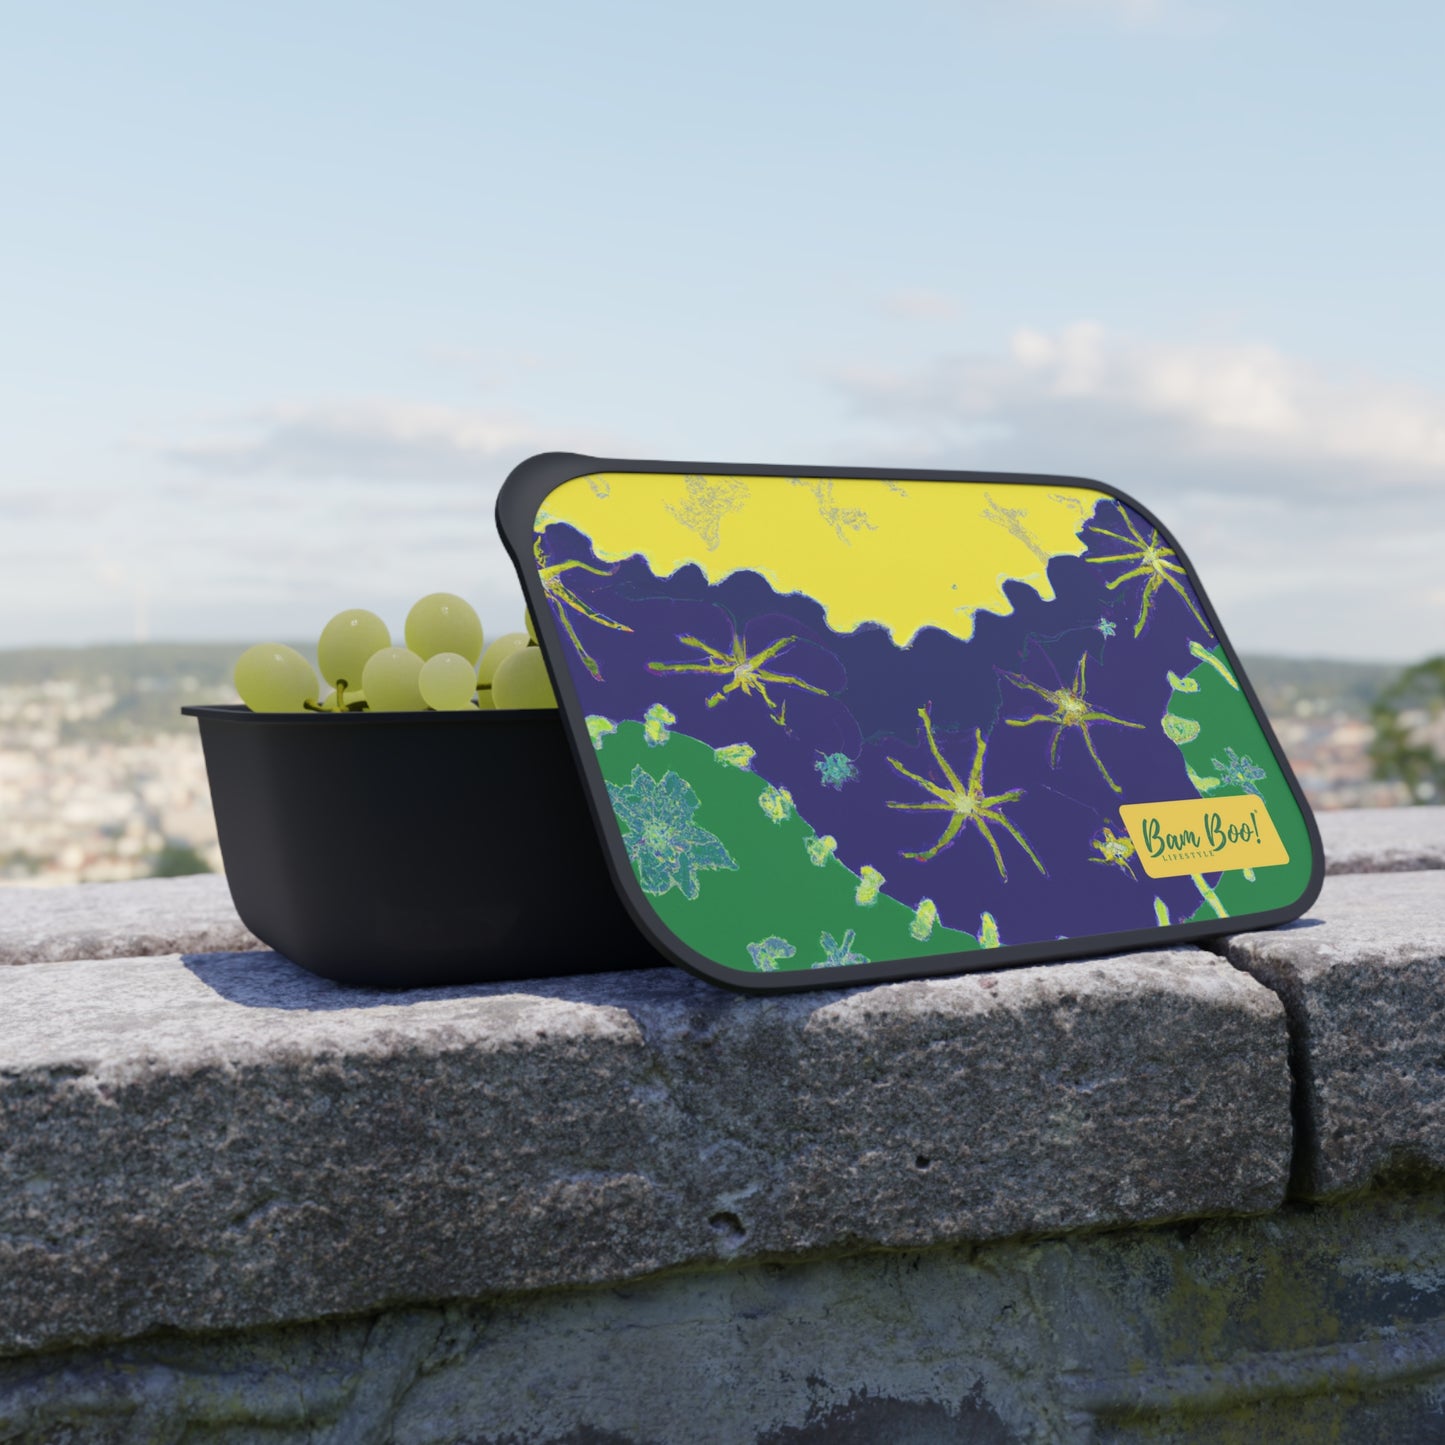 Vibrant Nature: A Digital Ode to the Beauty of Nature - Bam Boo! Lifestyle Eco-friendly PLA Bento Box with Band and Utensils